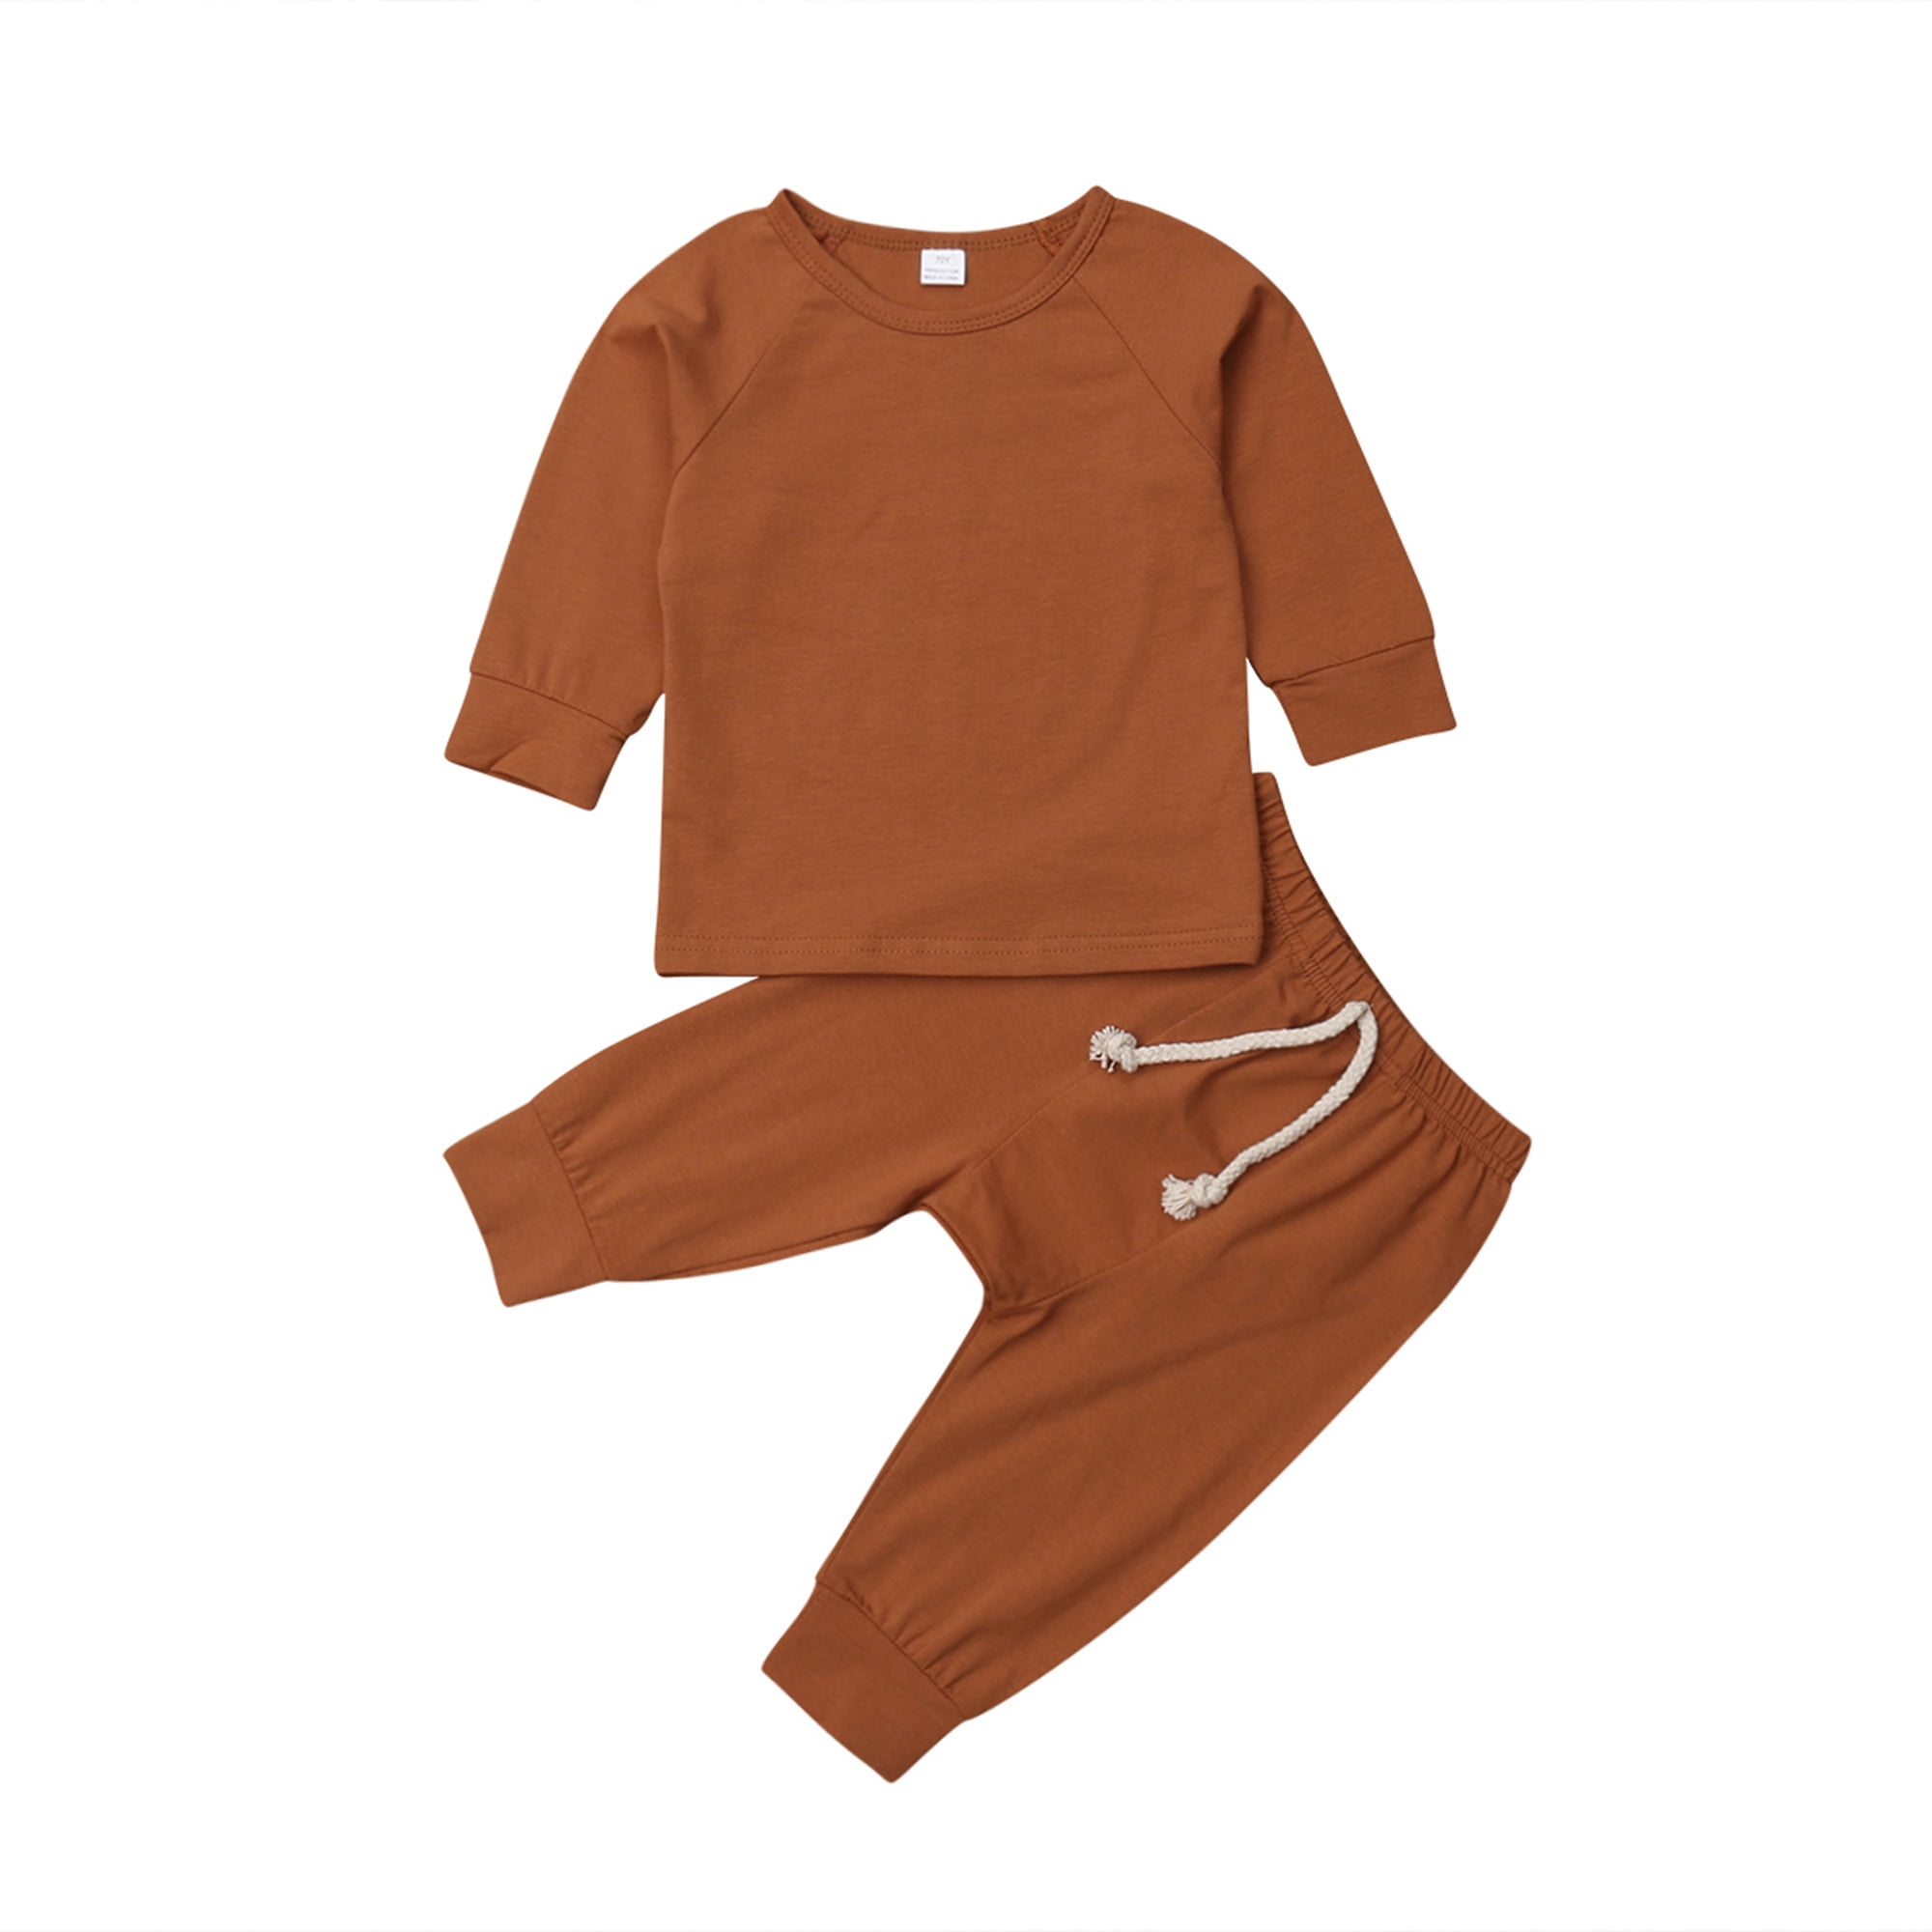 Details about   2pcs Kids Baby boys girls clothes top+pants 100% cotton baby pajamas sleepwear 